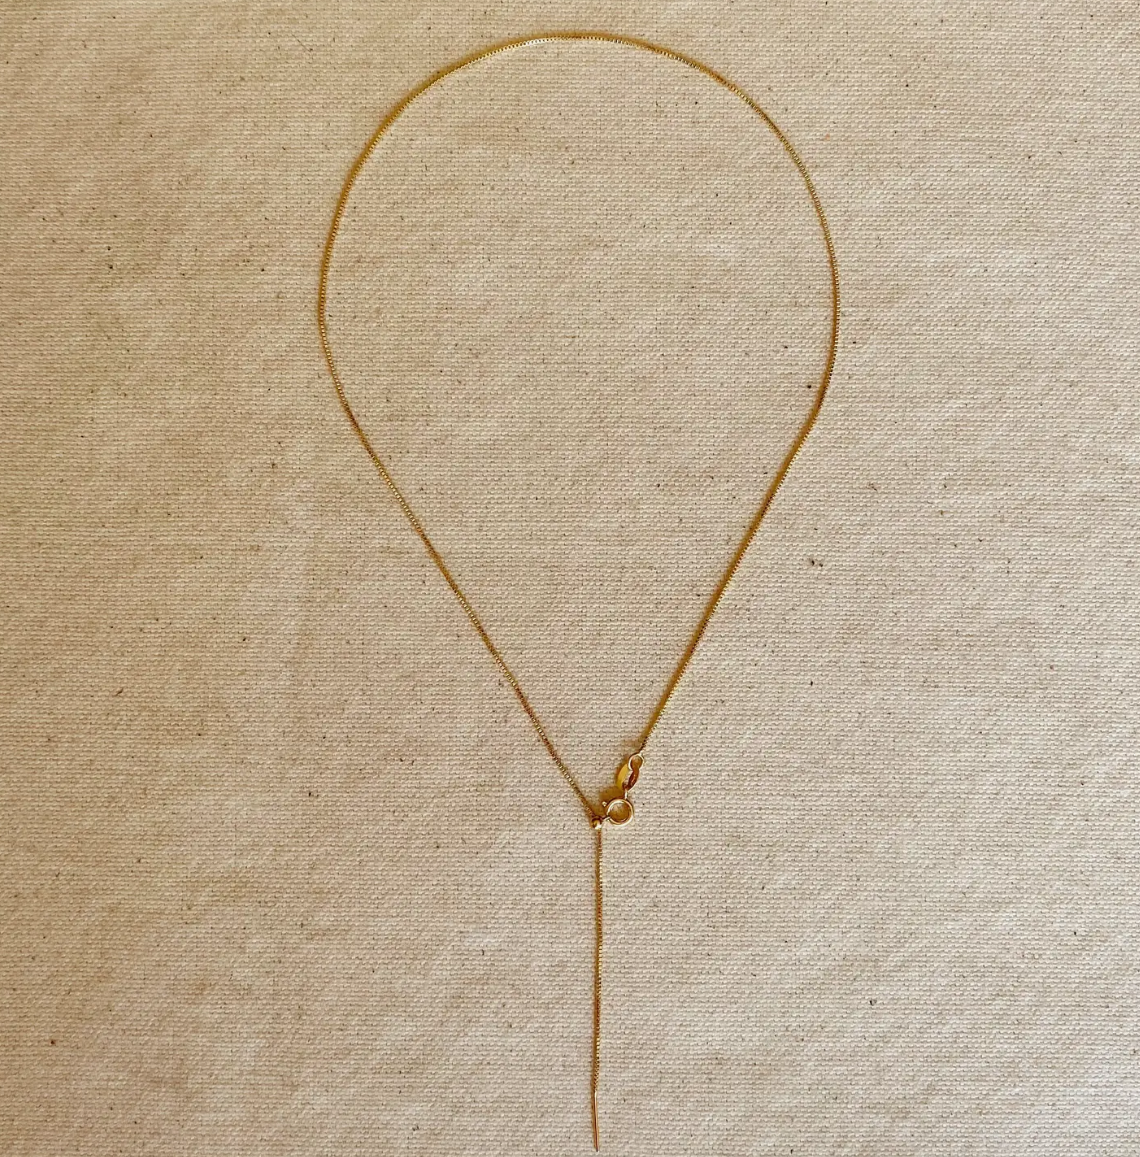 Gold Filled Adjustable Chain Necklace